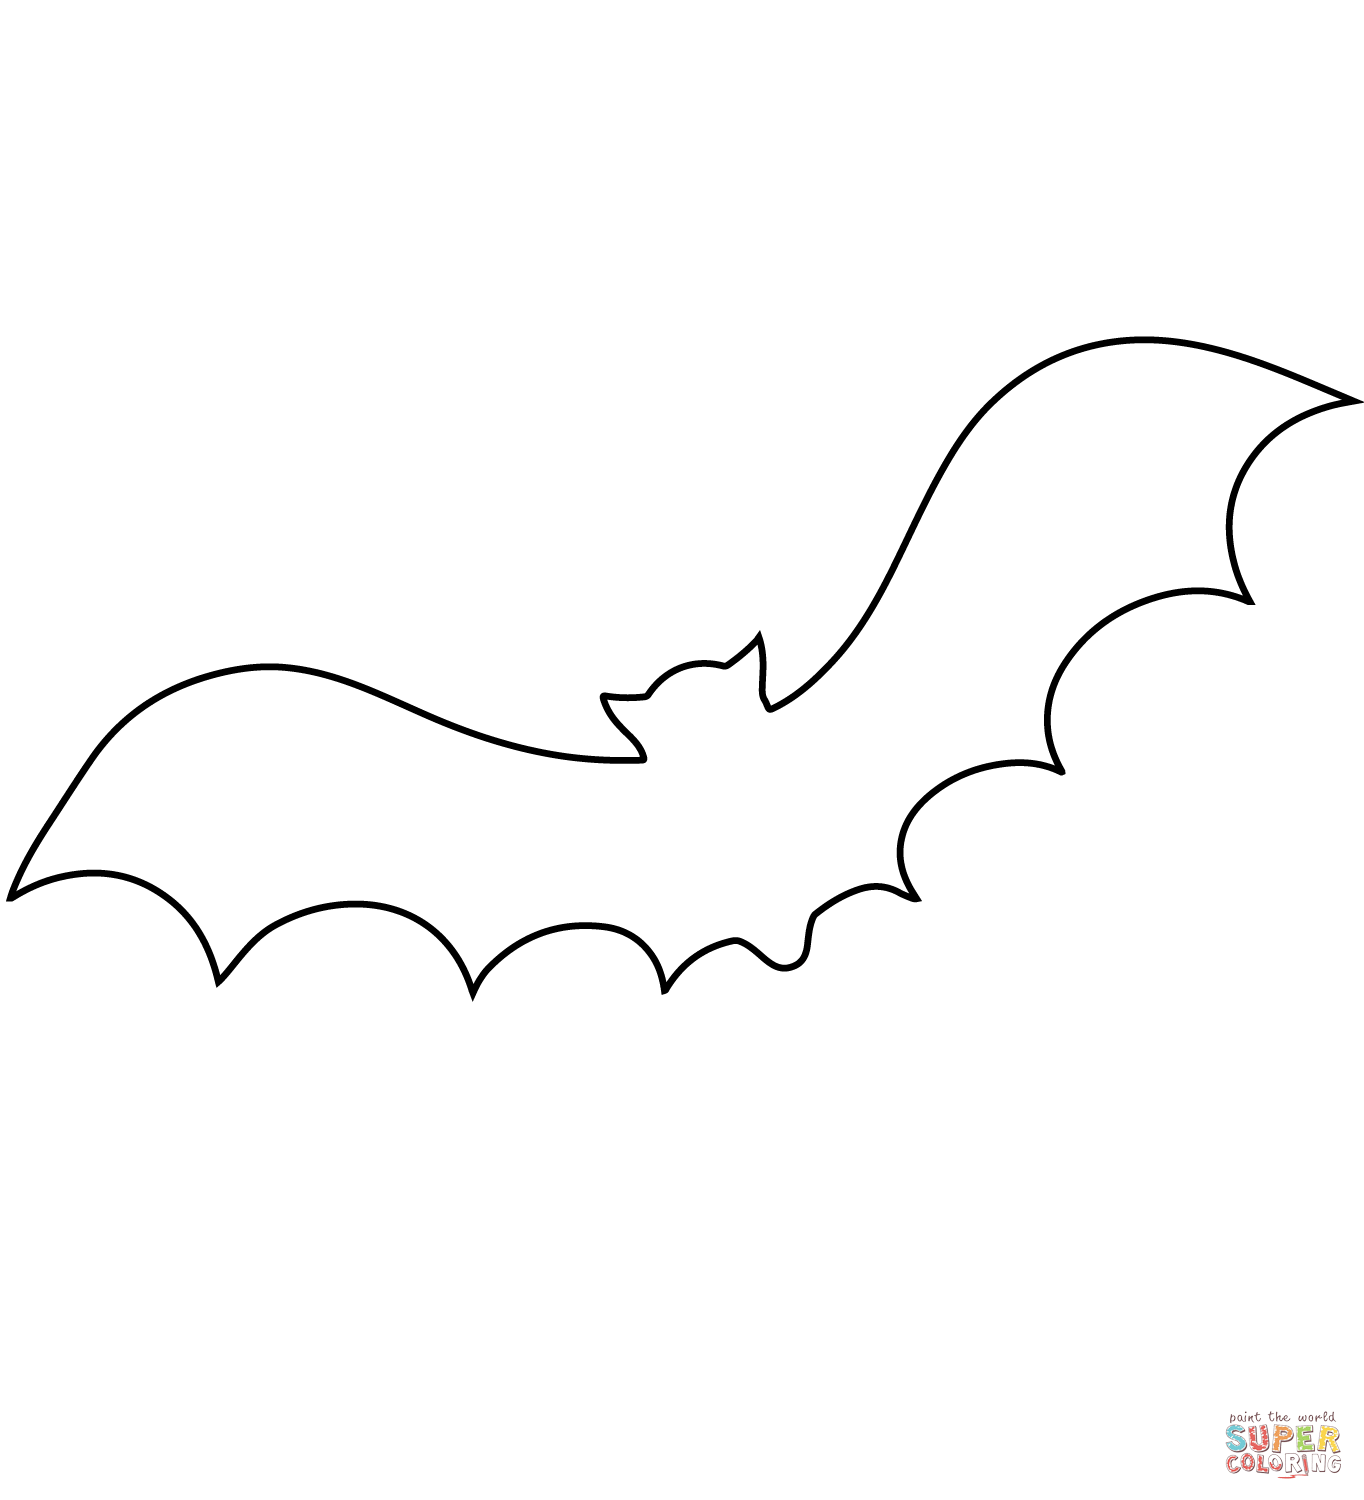 Bat outline coloring page free printable coloring pages bat outline bat coloring pages free printable coloring pages